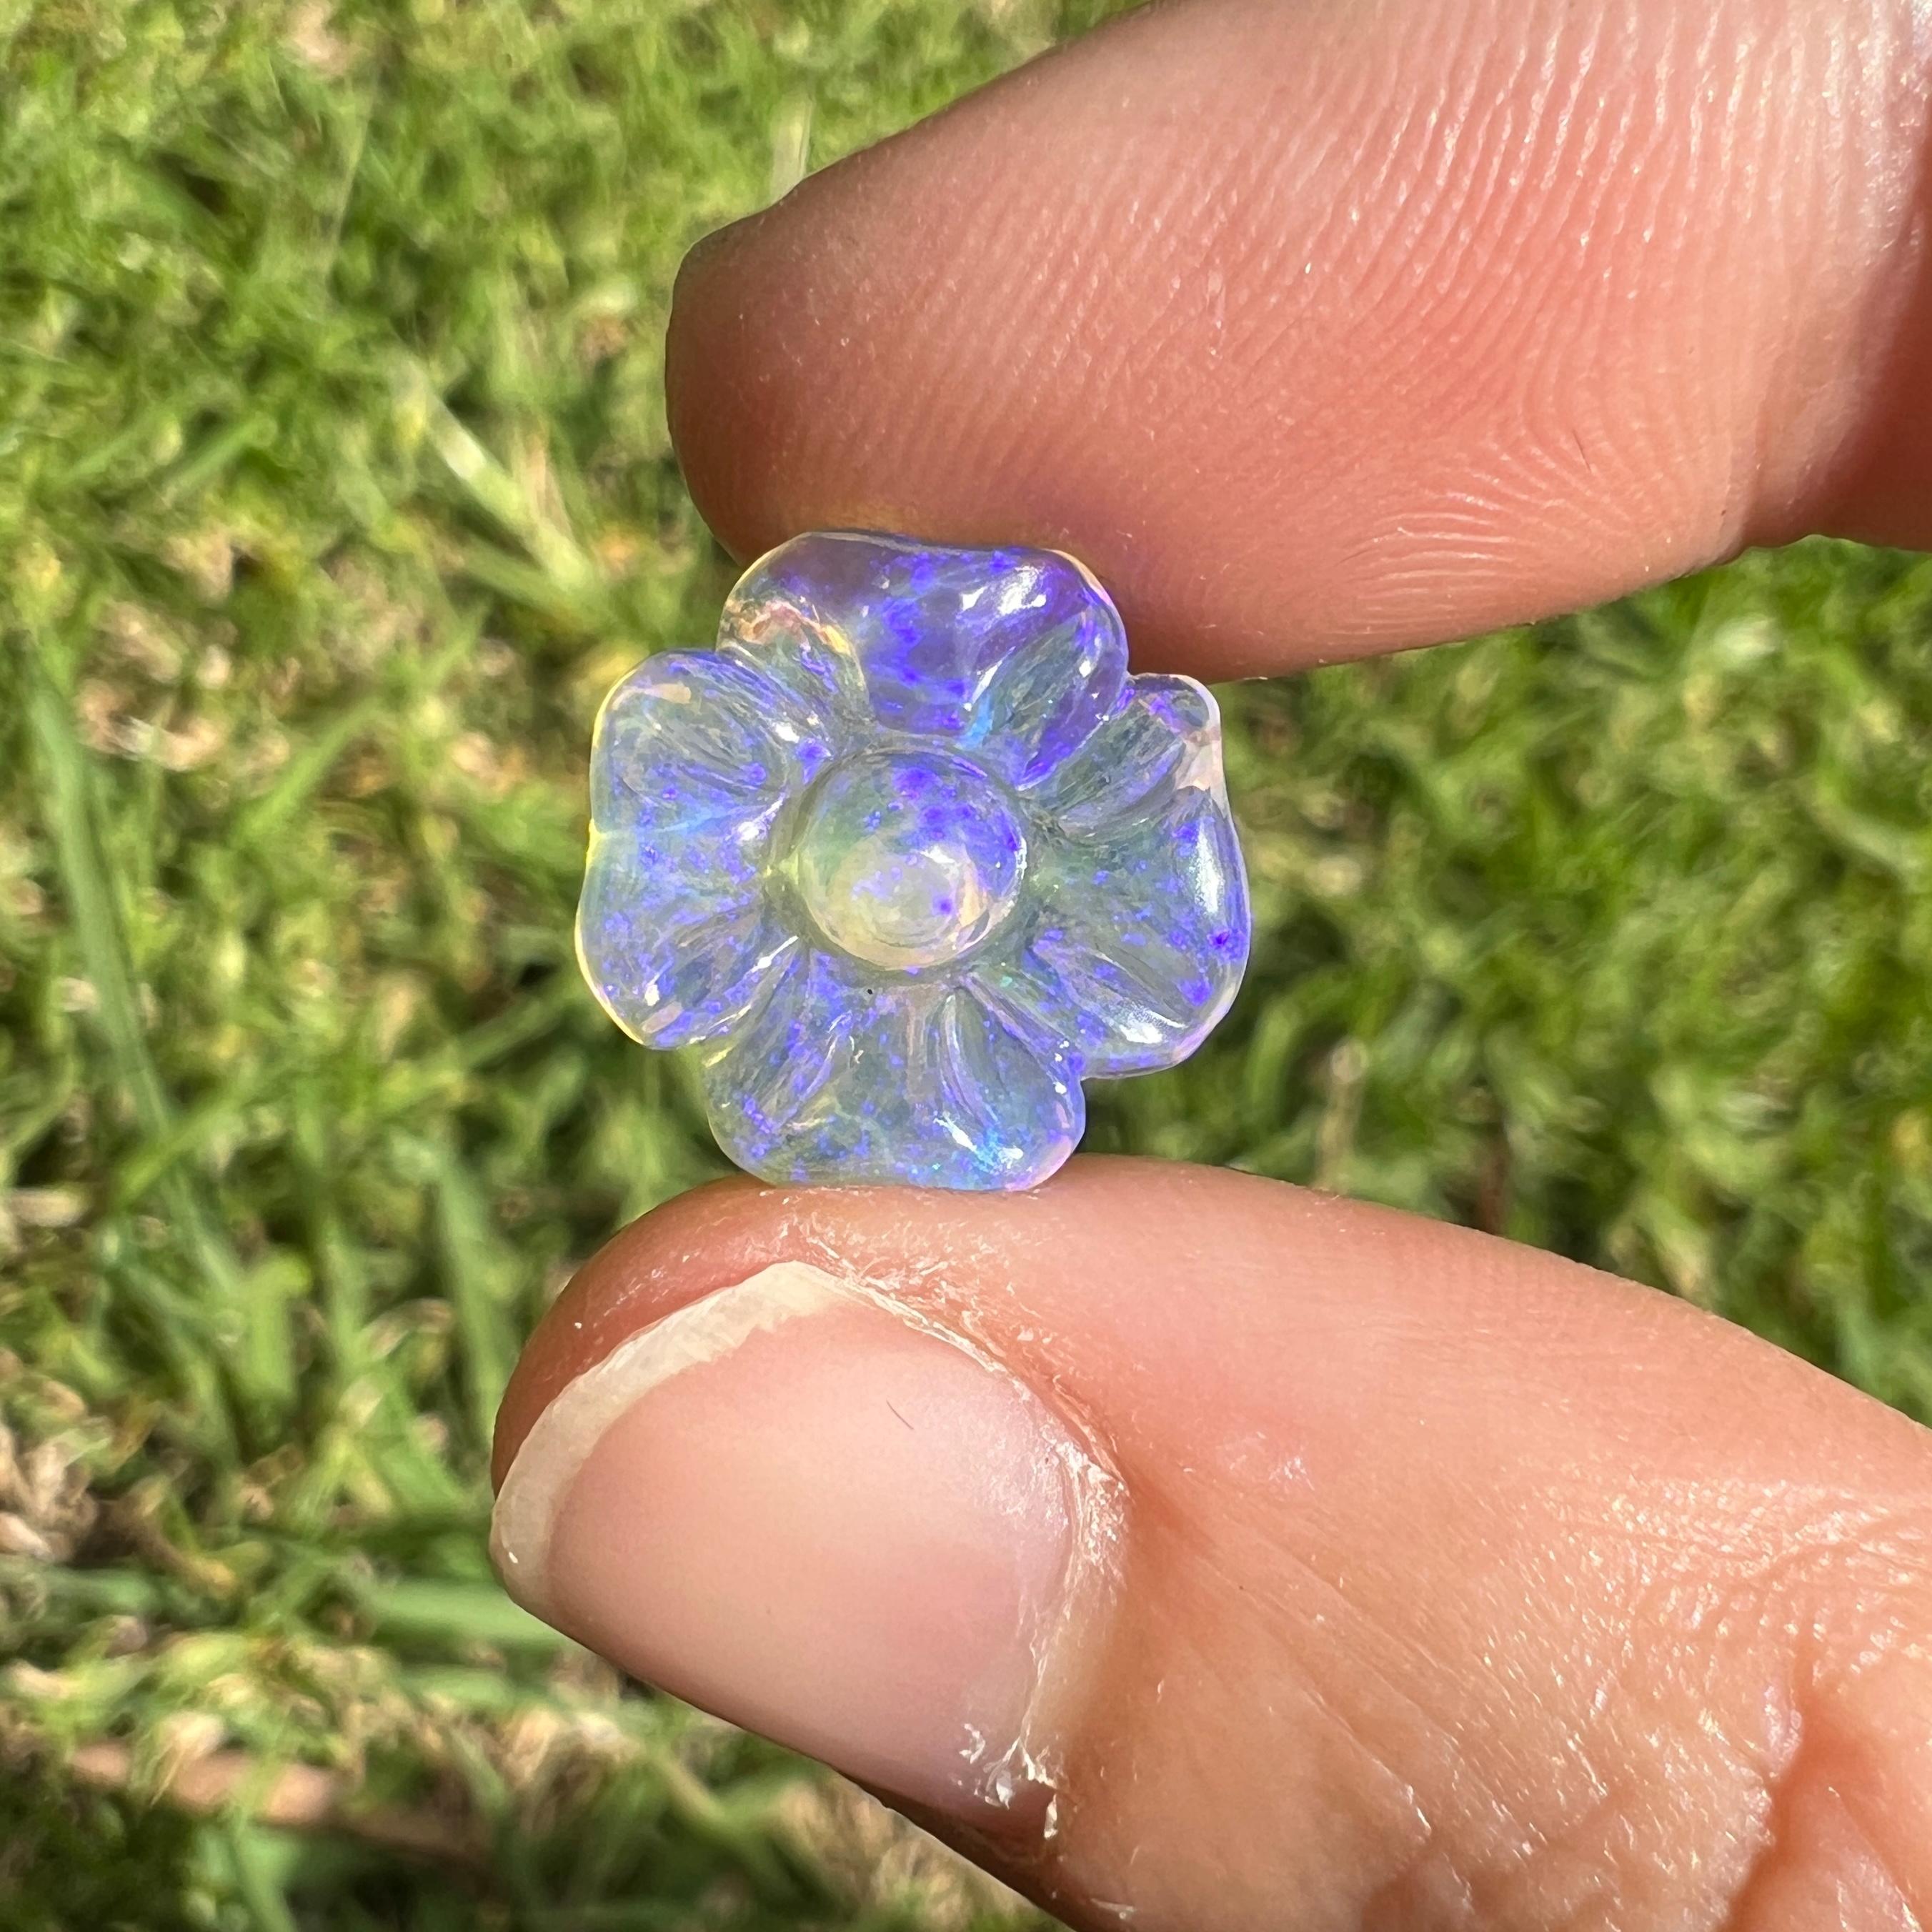 This beautiful 3.33 Ct Australian wood replacement opal was mined by Sue Cooper at her Russells opal mine in western Queensland, Australia in 2021. Sue processed the rough opal herself and selected it to be carved into a flower. The opal's size of